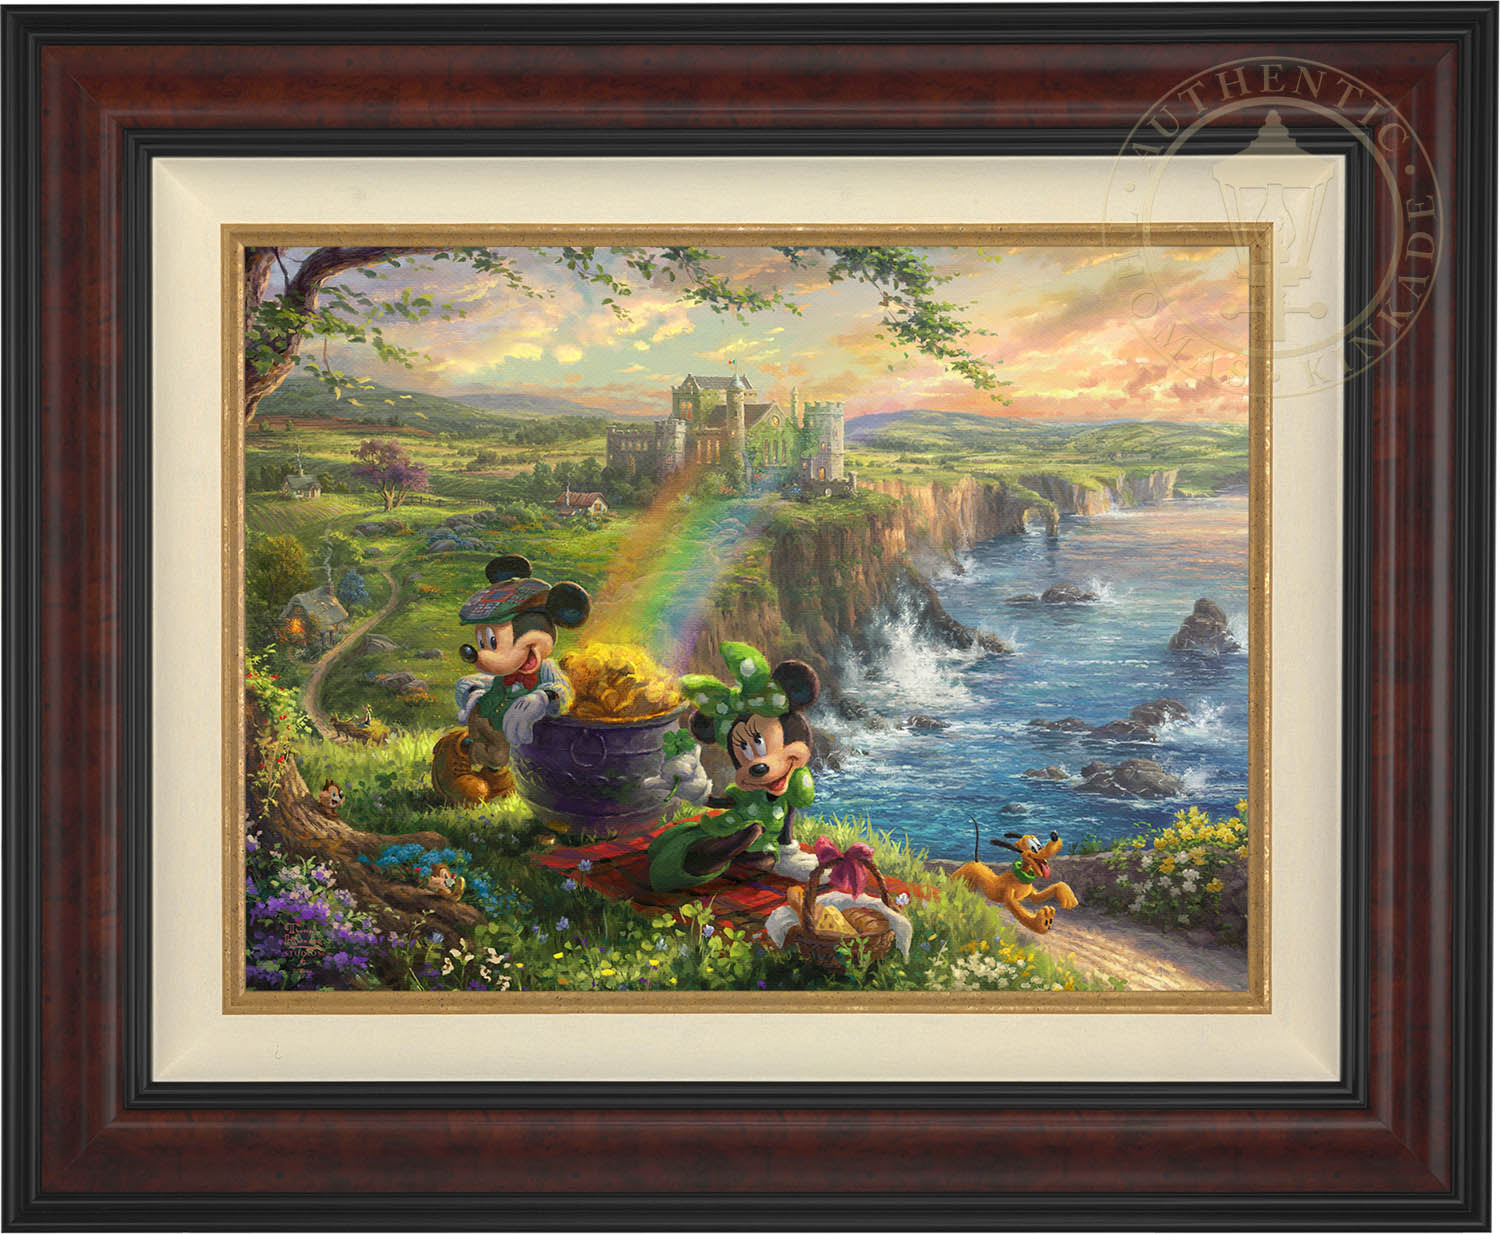 Dressed in the Irish's traditional color, Mickey and Minnie seem to have luck on their side. Burl Frame